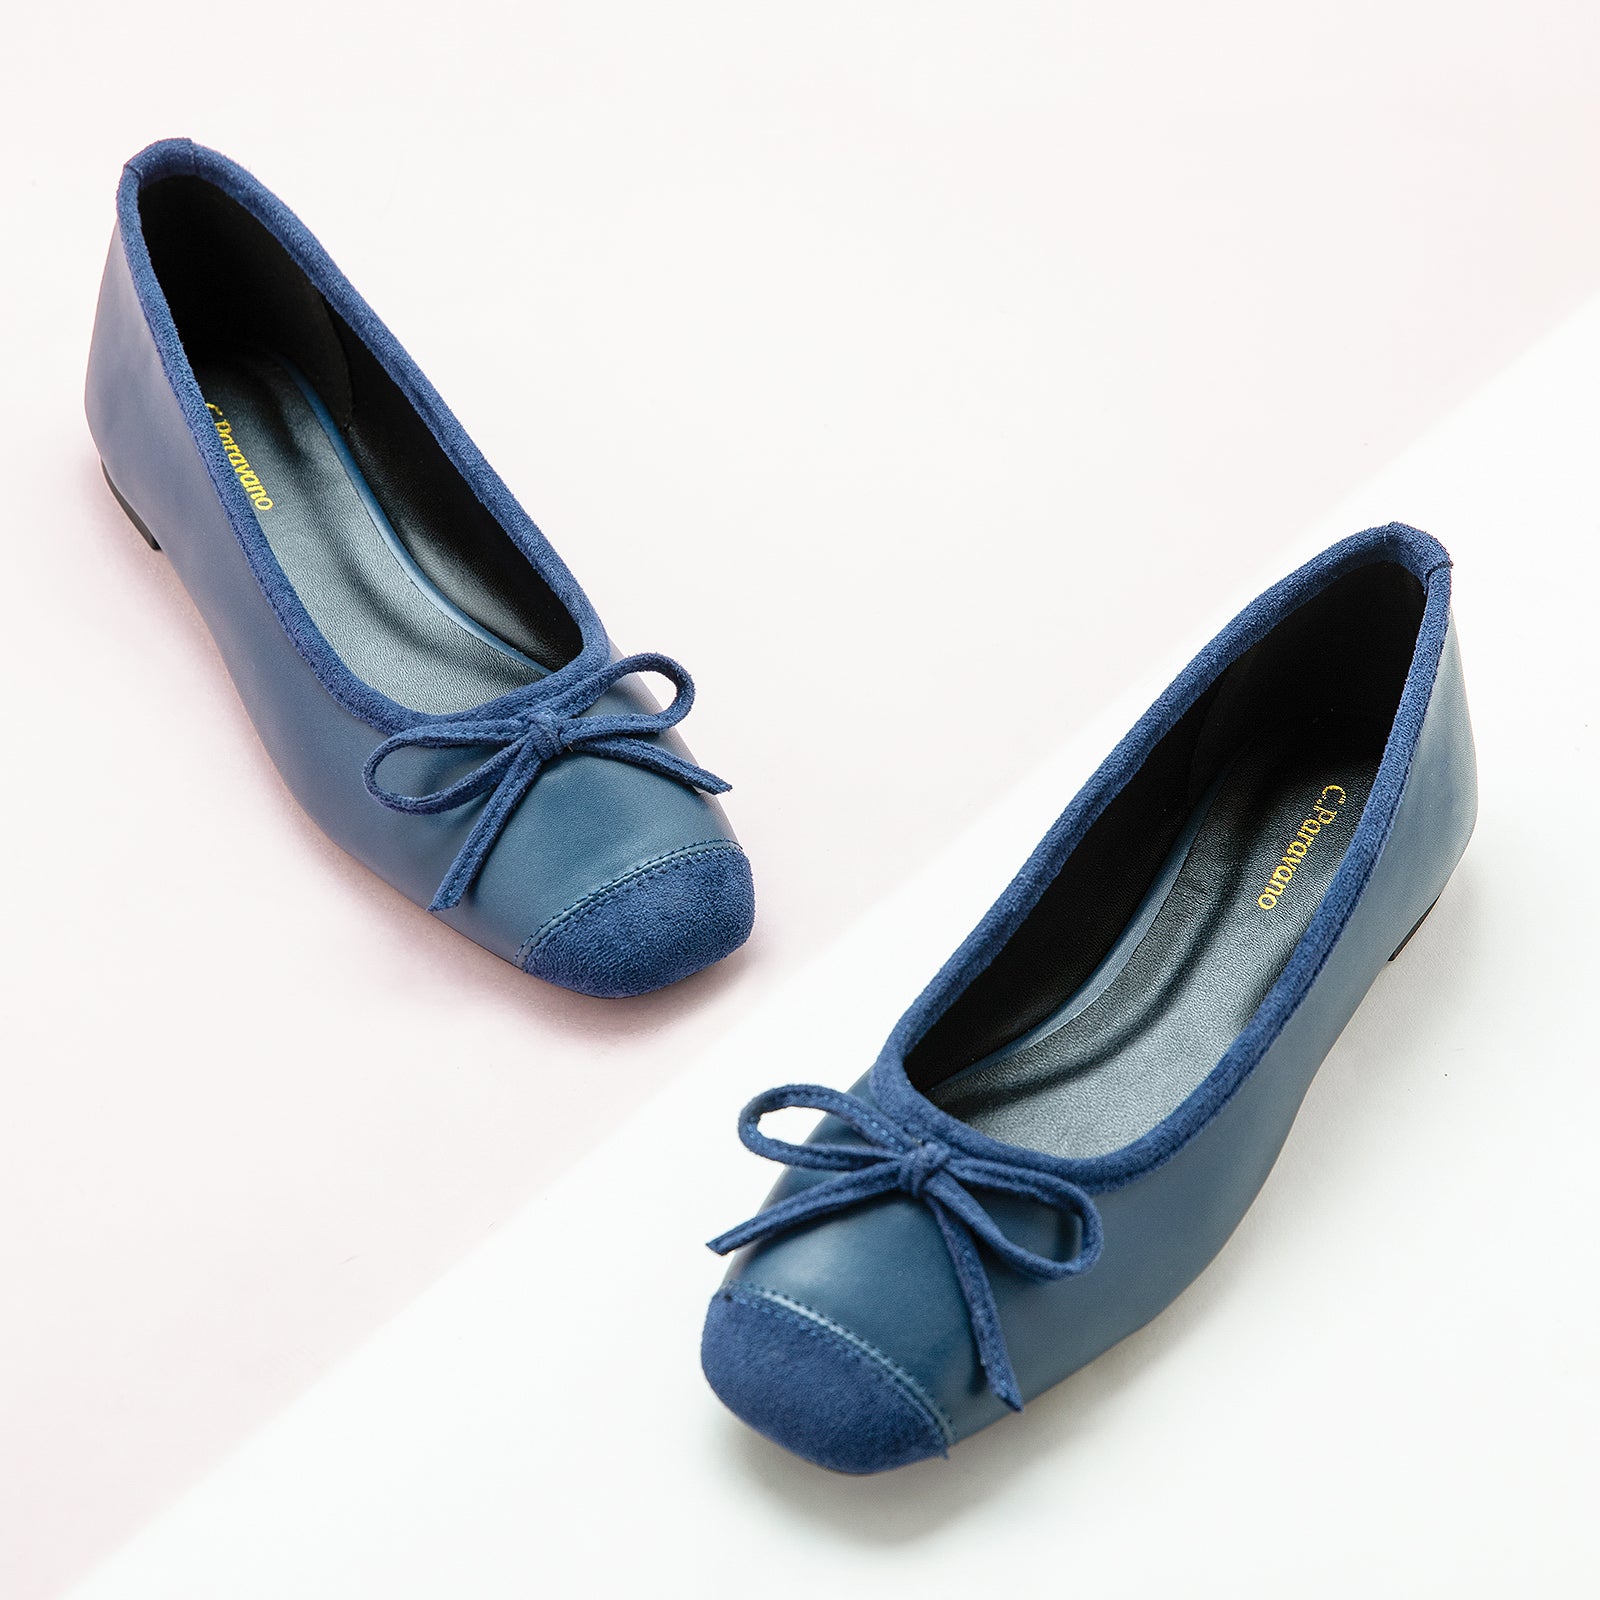 Suede Toe Bowknot Ballet Flats in Navy, a classic and versatile choice for adding a touch of maritime charm to your ensemble